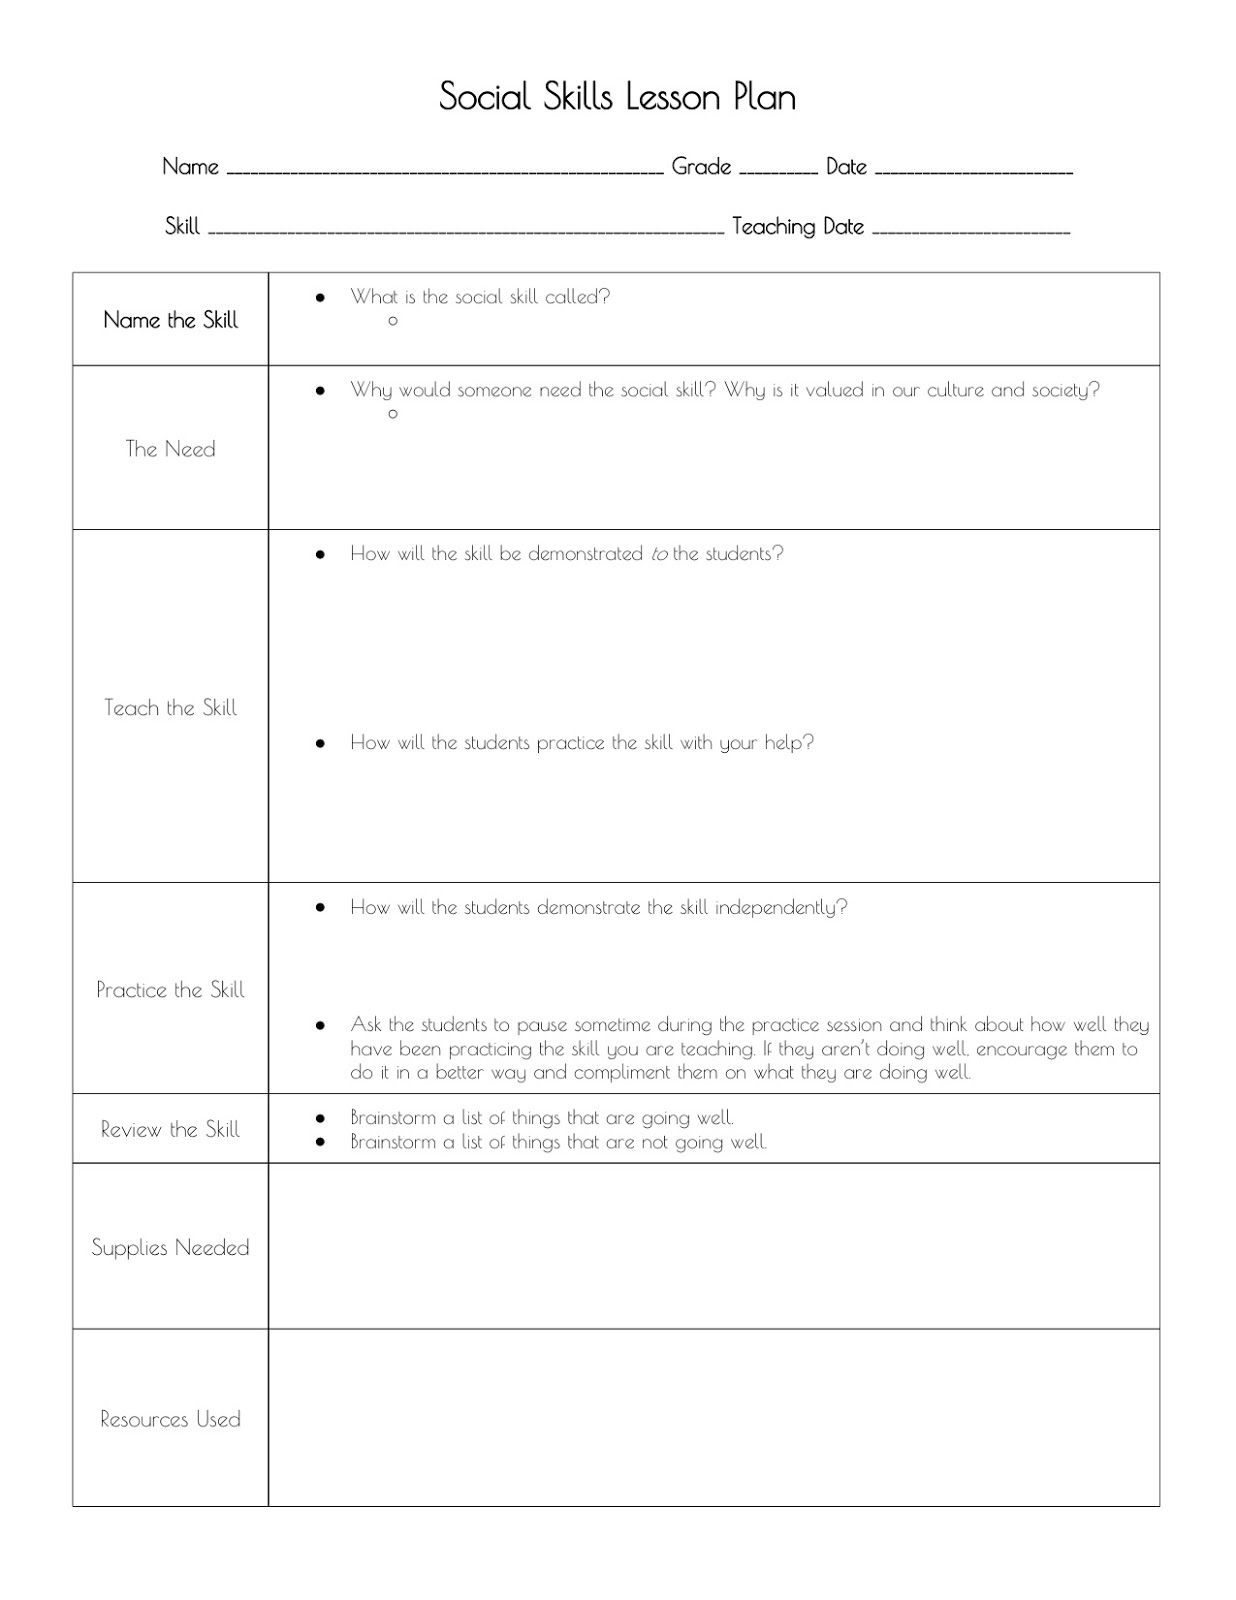 Sped Head: Social Skills Lesson Plan Format (With Images